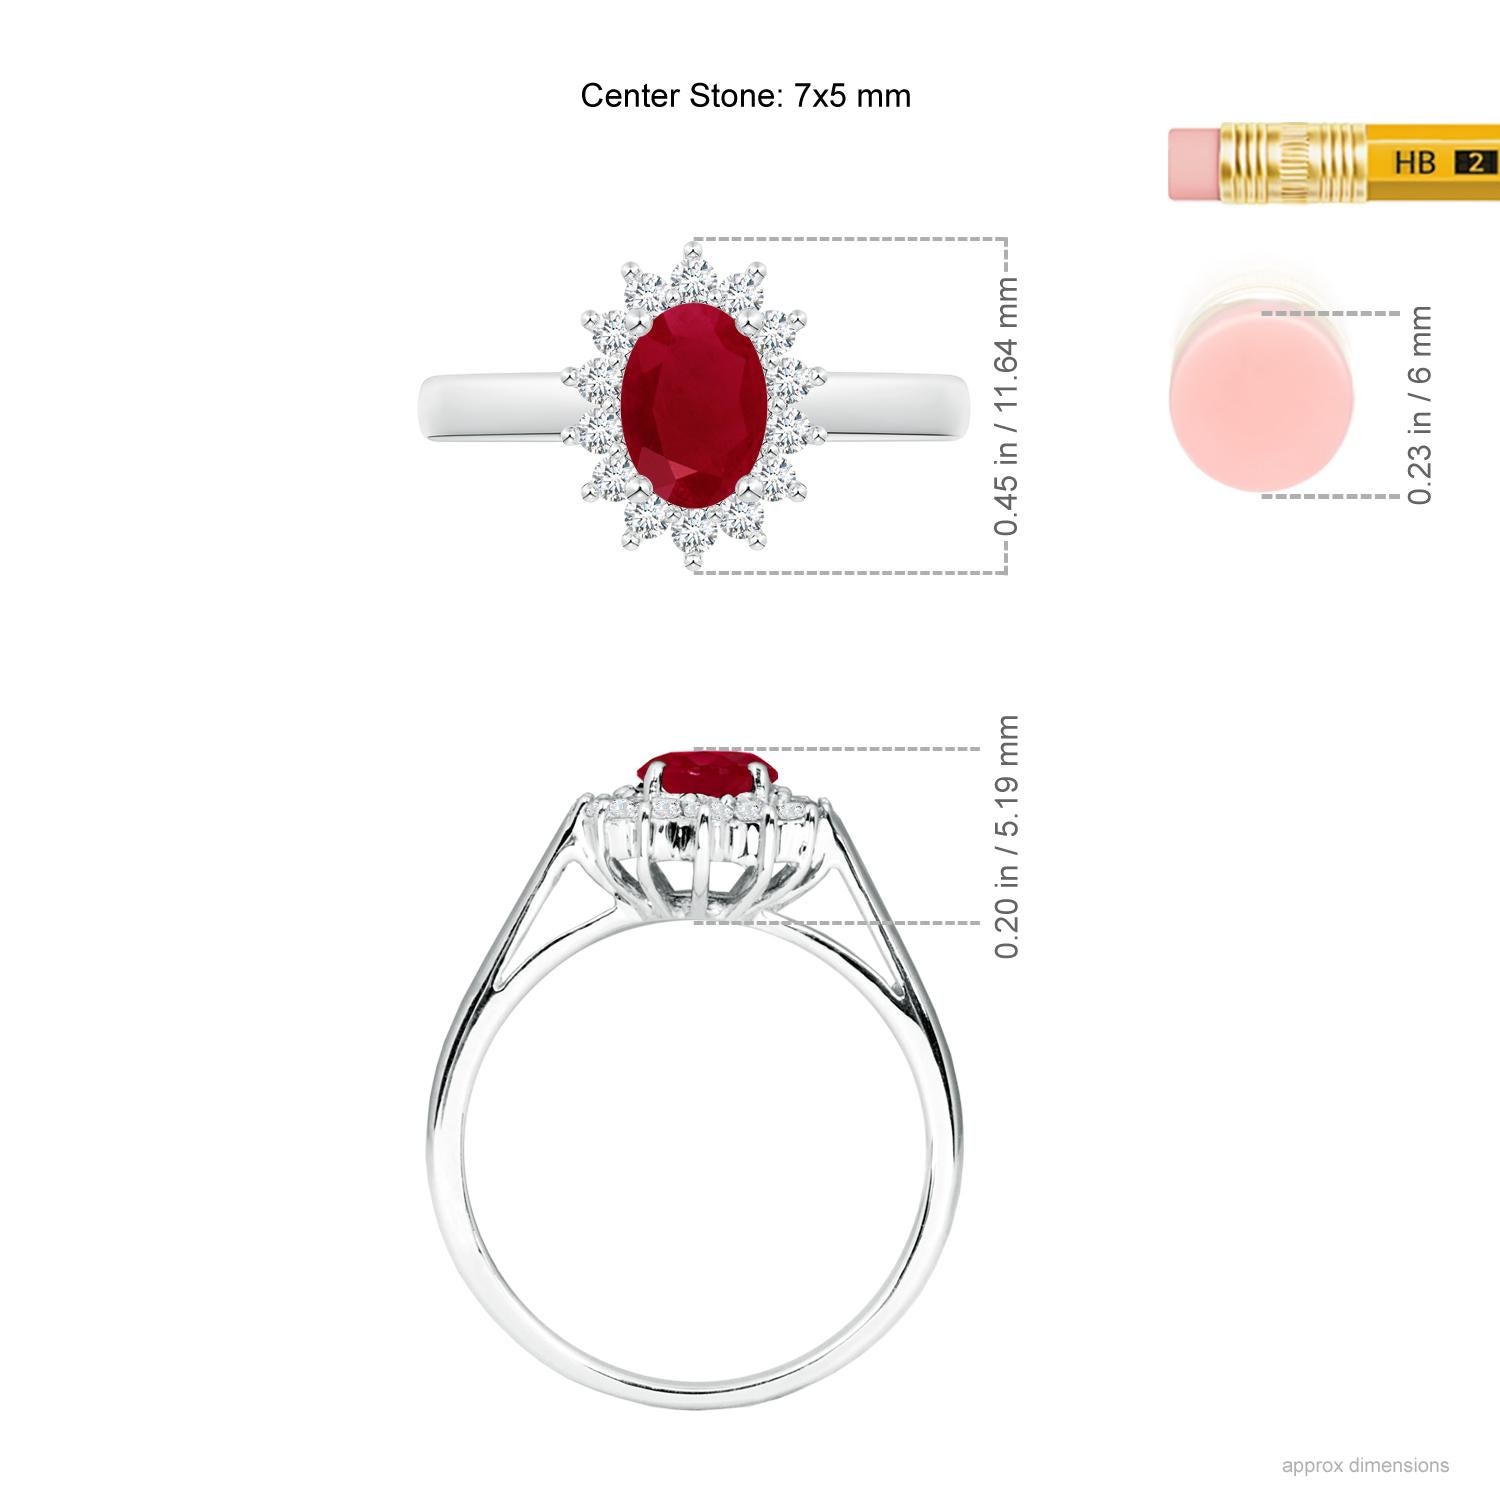 At the core of a scintillating floral halo is a radiant red oval ruby, held in a prong setting. This oval ruby ring is inspired by Princess Diana's beautiful engagement ring. It is crafted in Platinum and bespeaks glamour and elegance.
